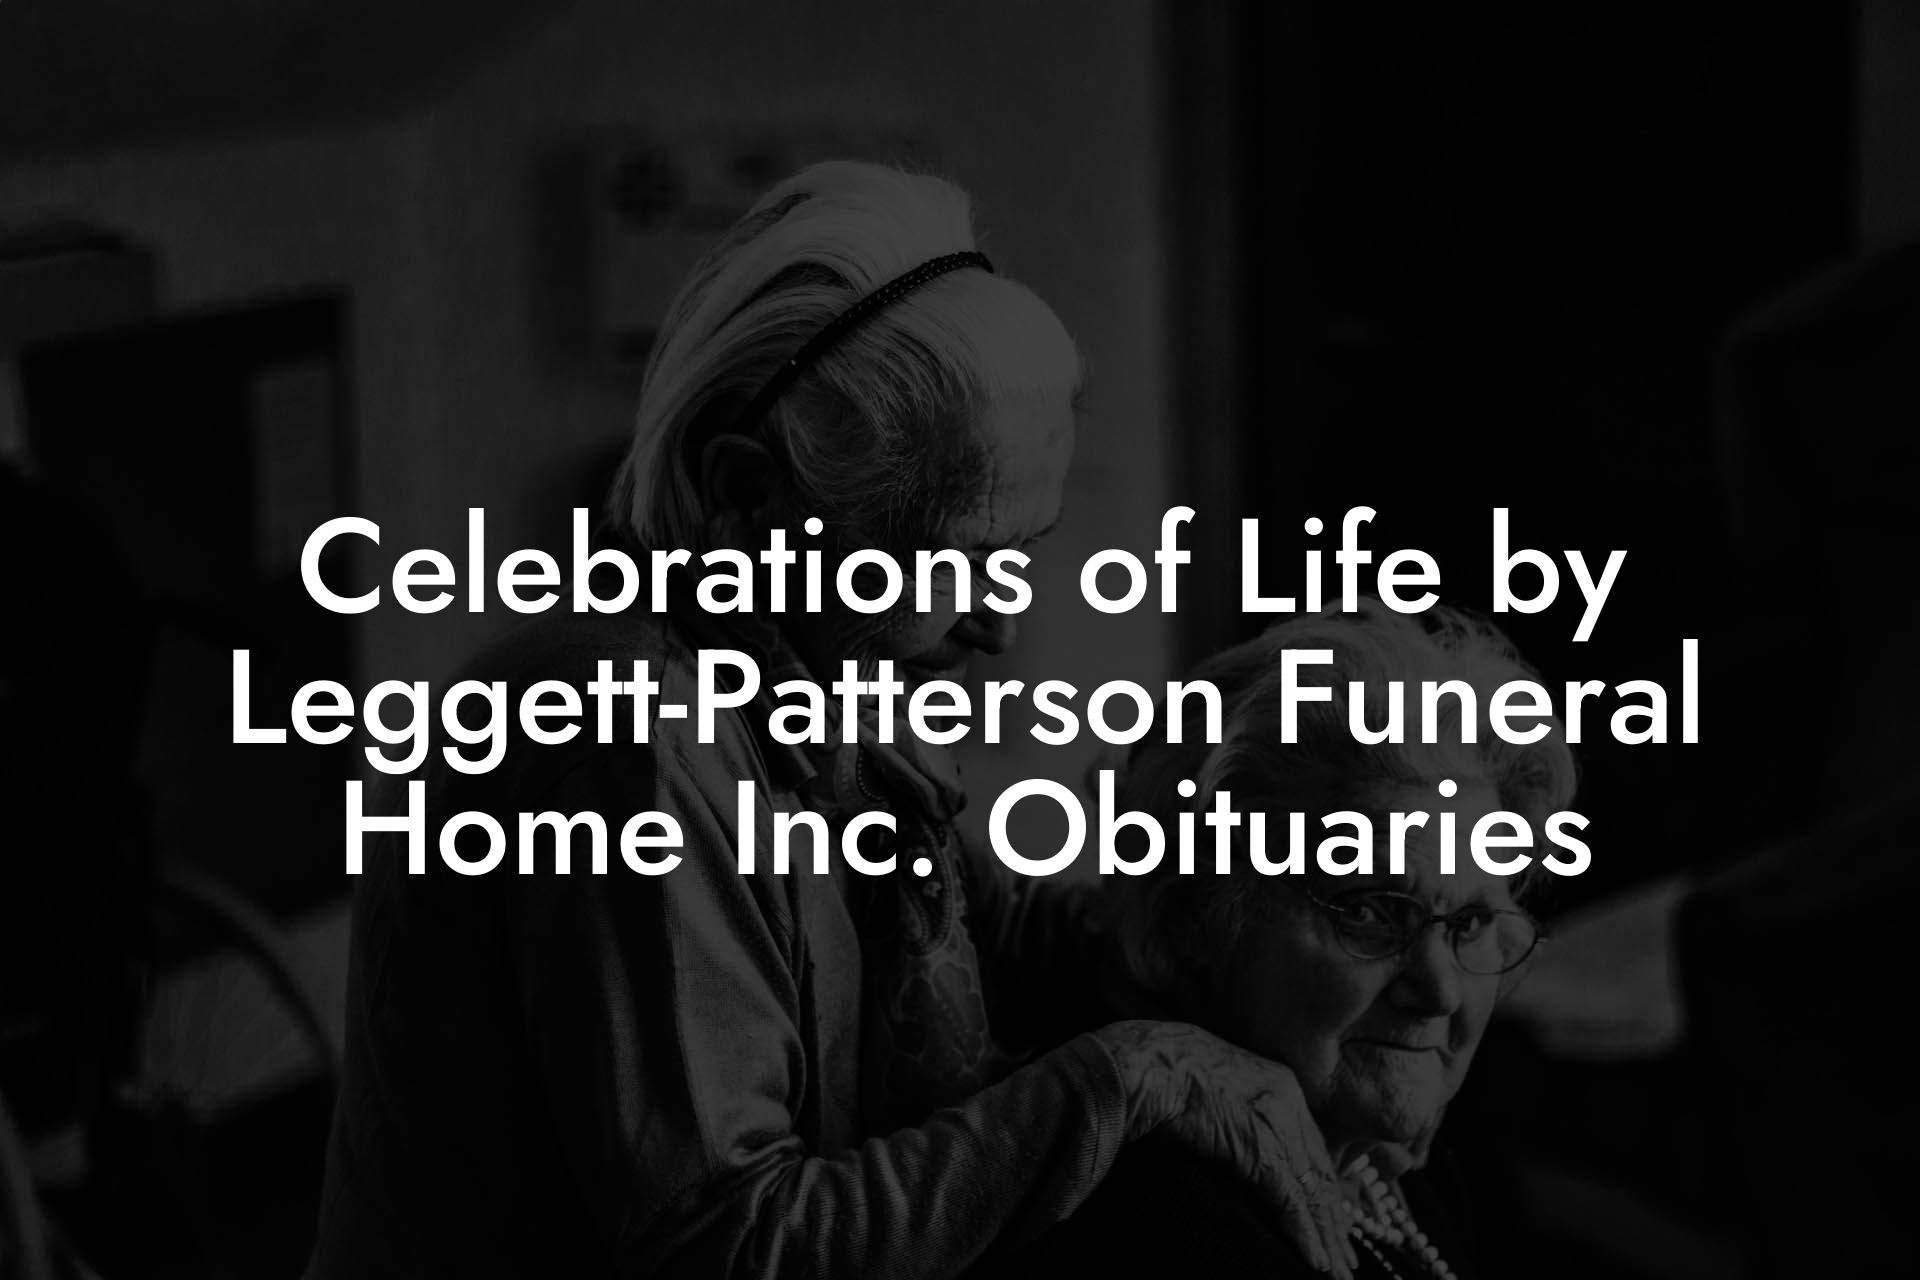 Celebrations of Life by Leggett-Patterson Funeral Home Inc. Obituaries